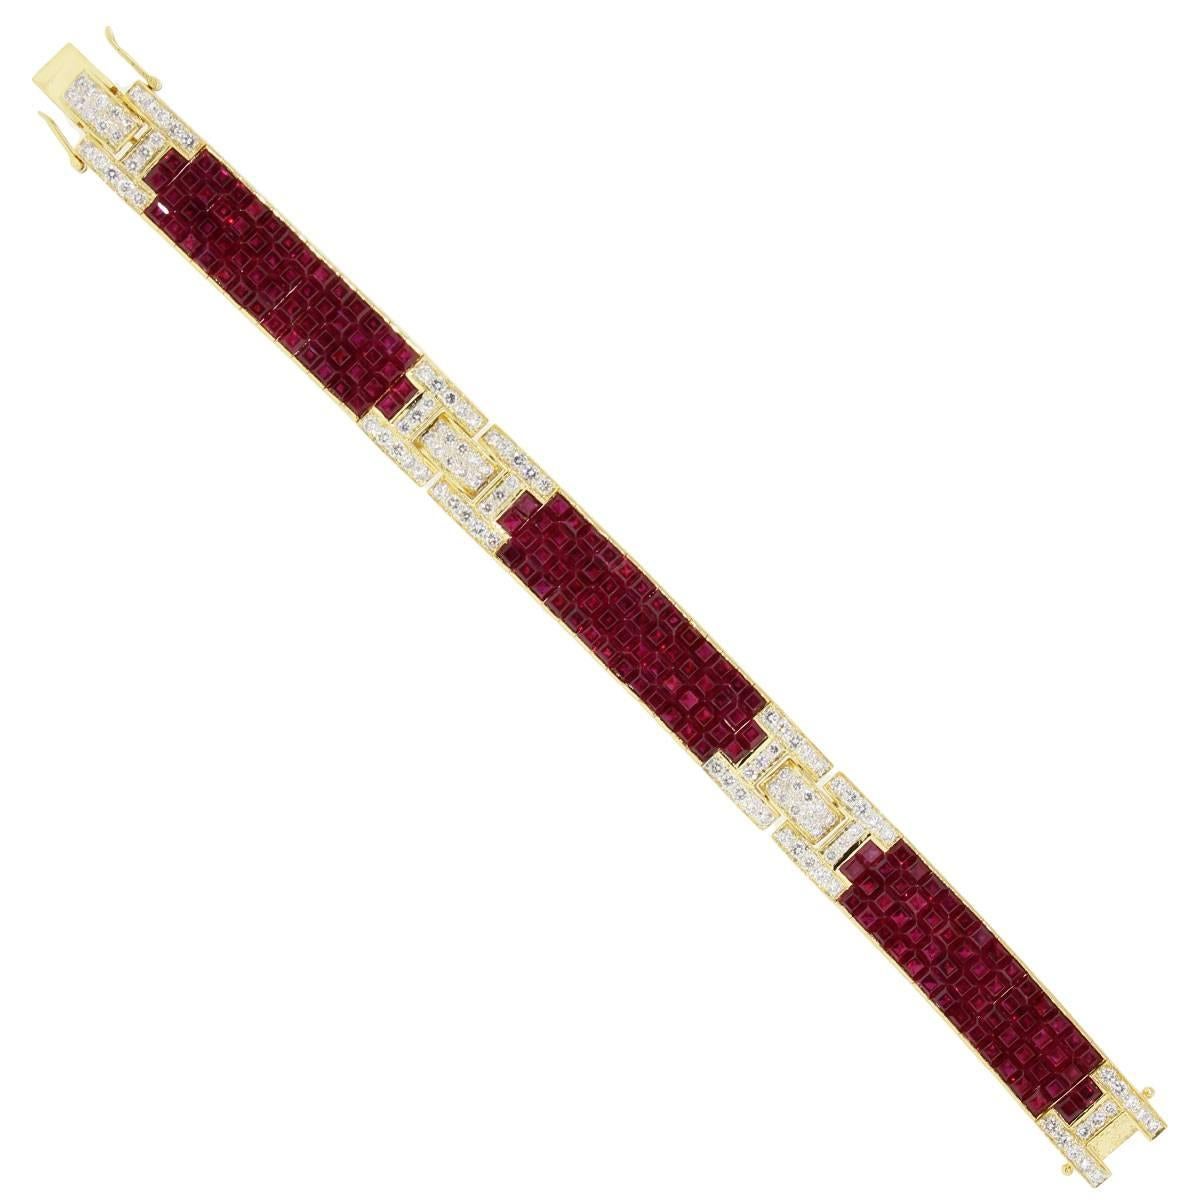 Style: 18k Yellow Gold 2.16ctw Diamonds and 8.5ctw Rubies Bracelet
Material: 18k Yellow Gold
Diamond Details: Approximately 2.16ctw of Round Brilliant Diamonds. Diamonds are G/H in color and VS in clarity.
Gemstone Details: Approximately 8.5ctw of